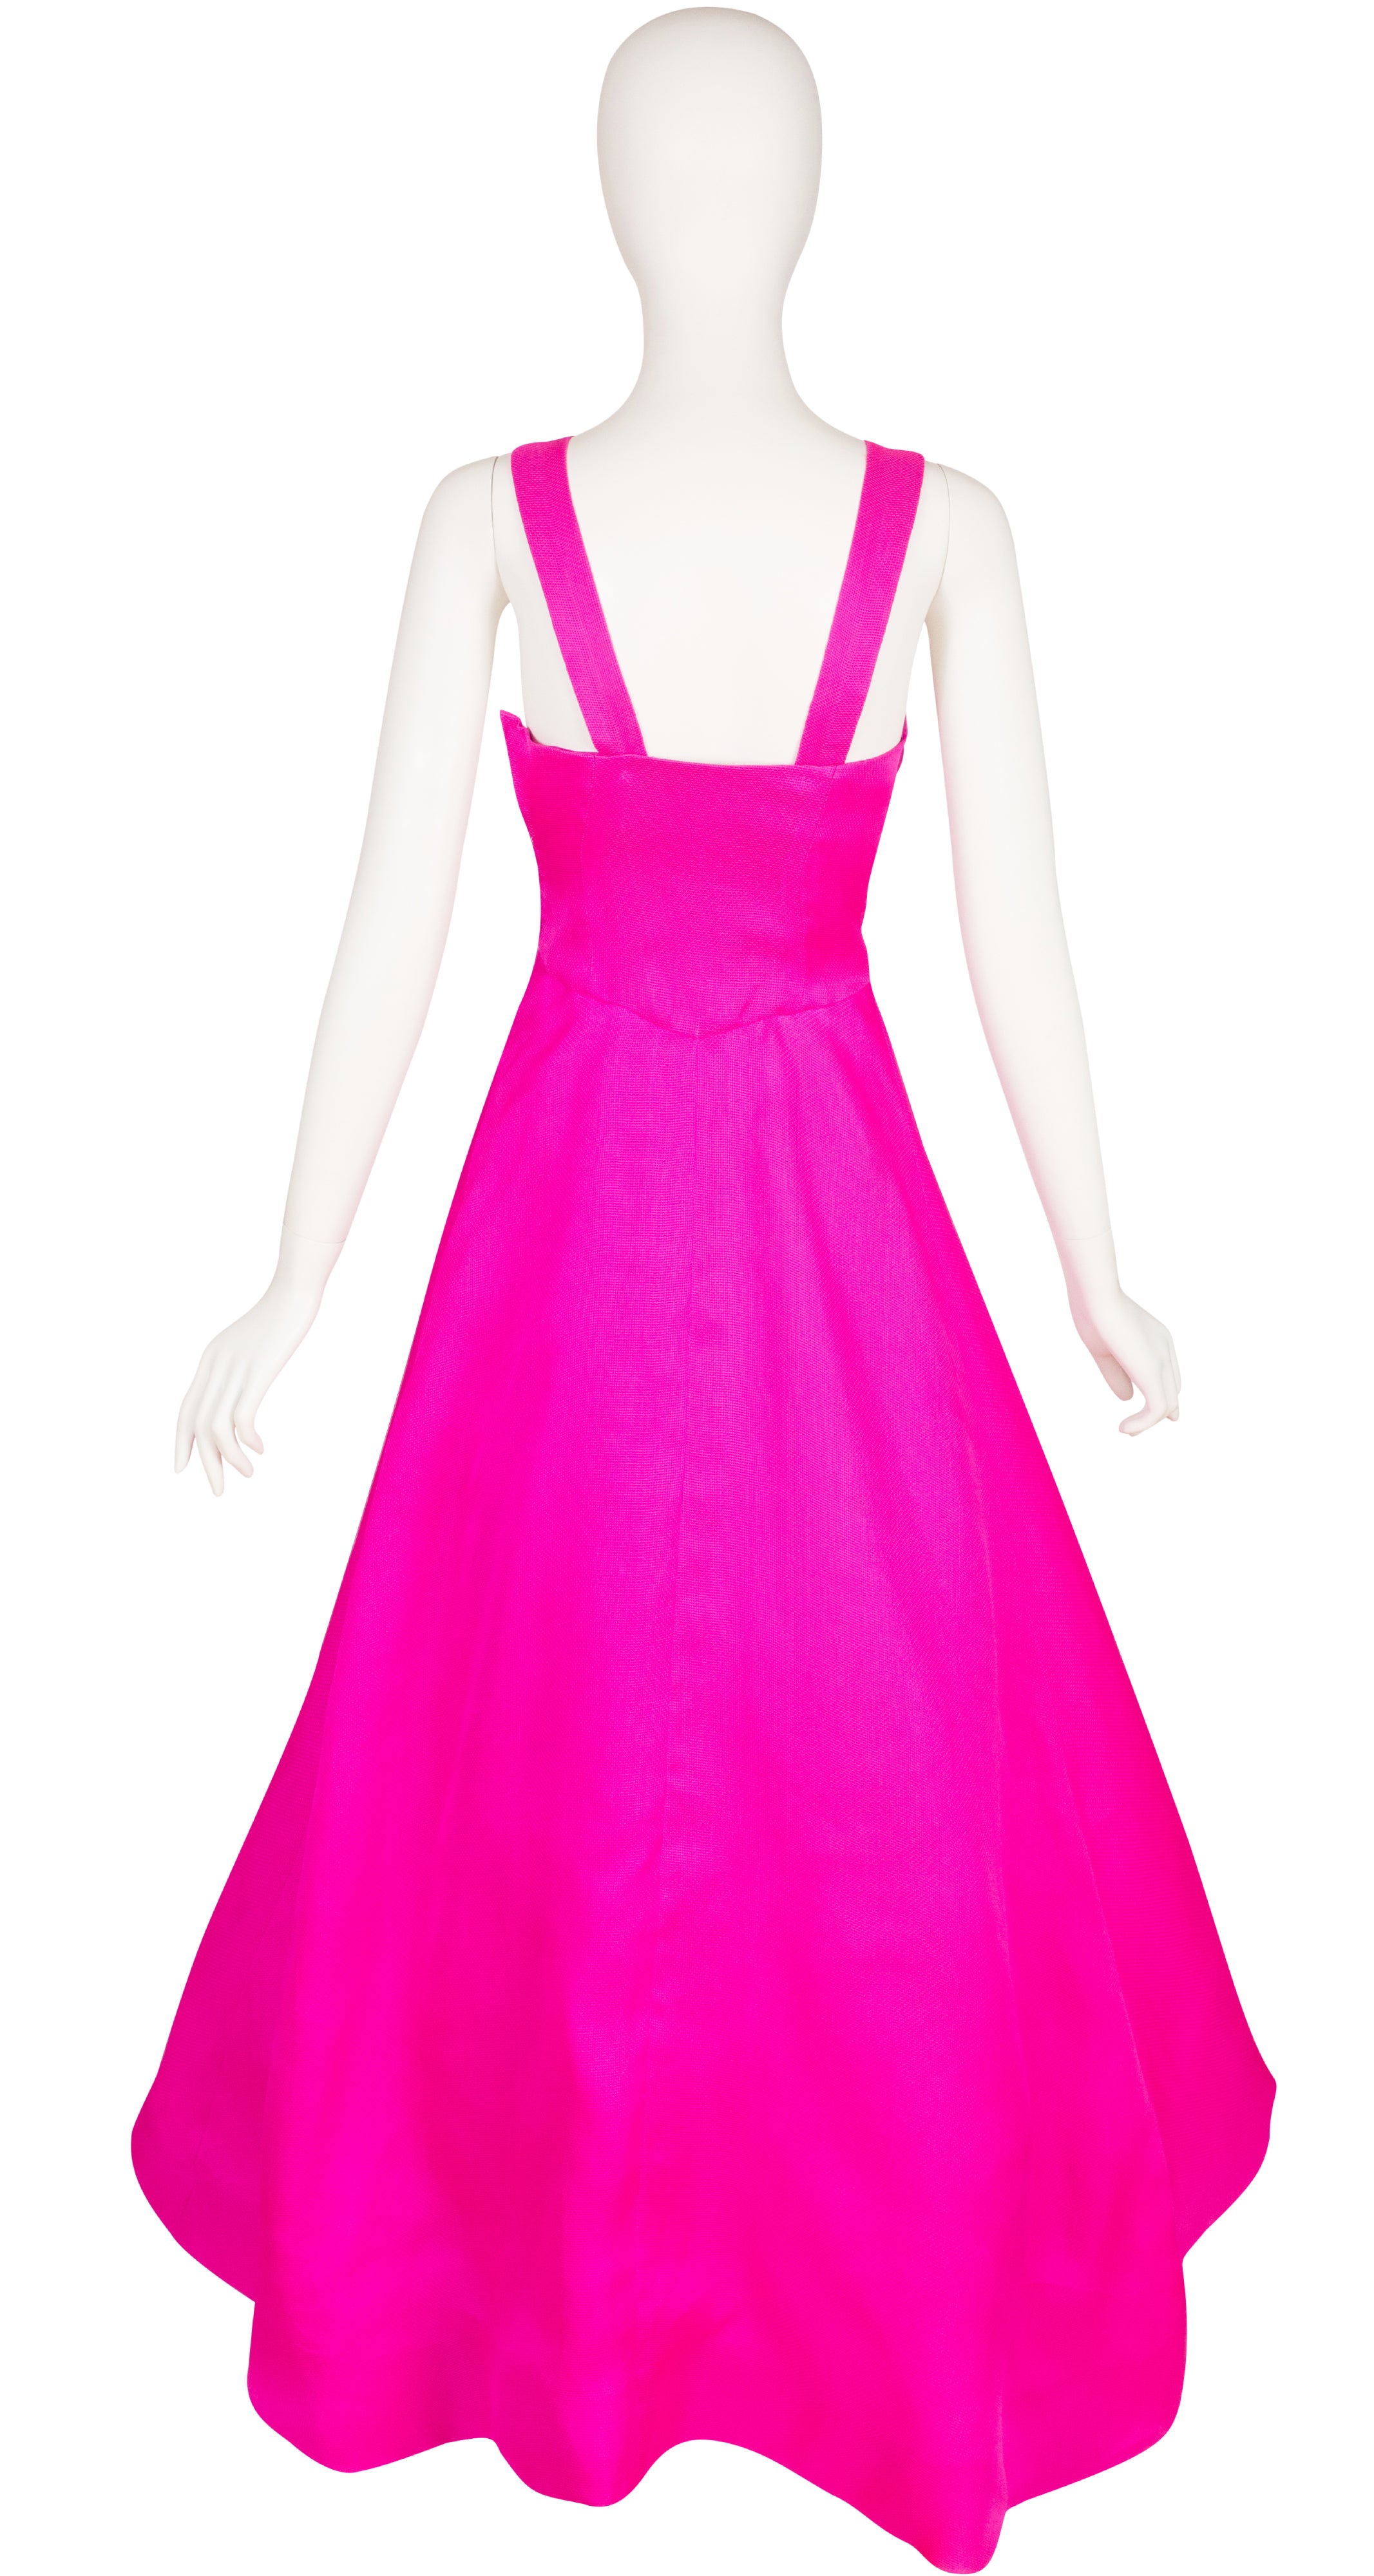 1980s Shocking Pink Woven Silk Evening Gown